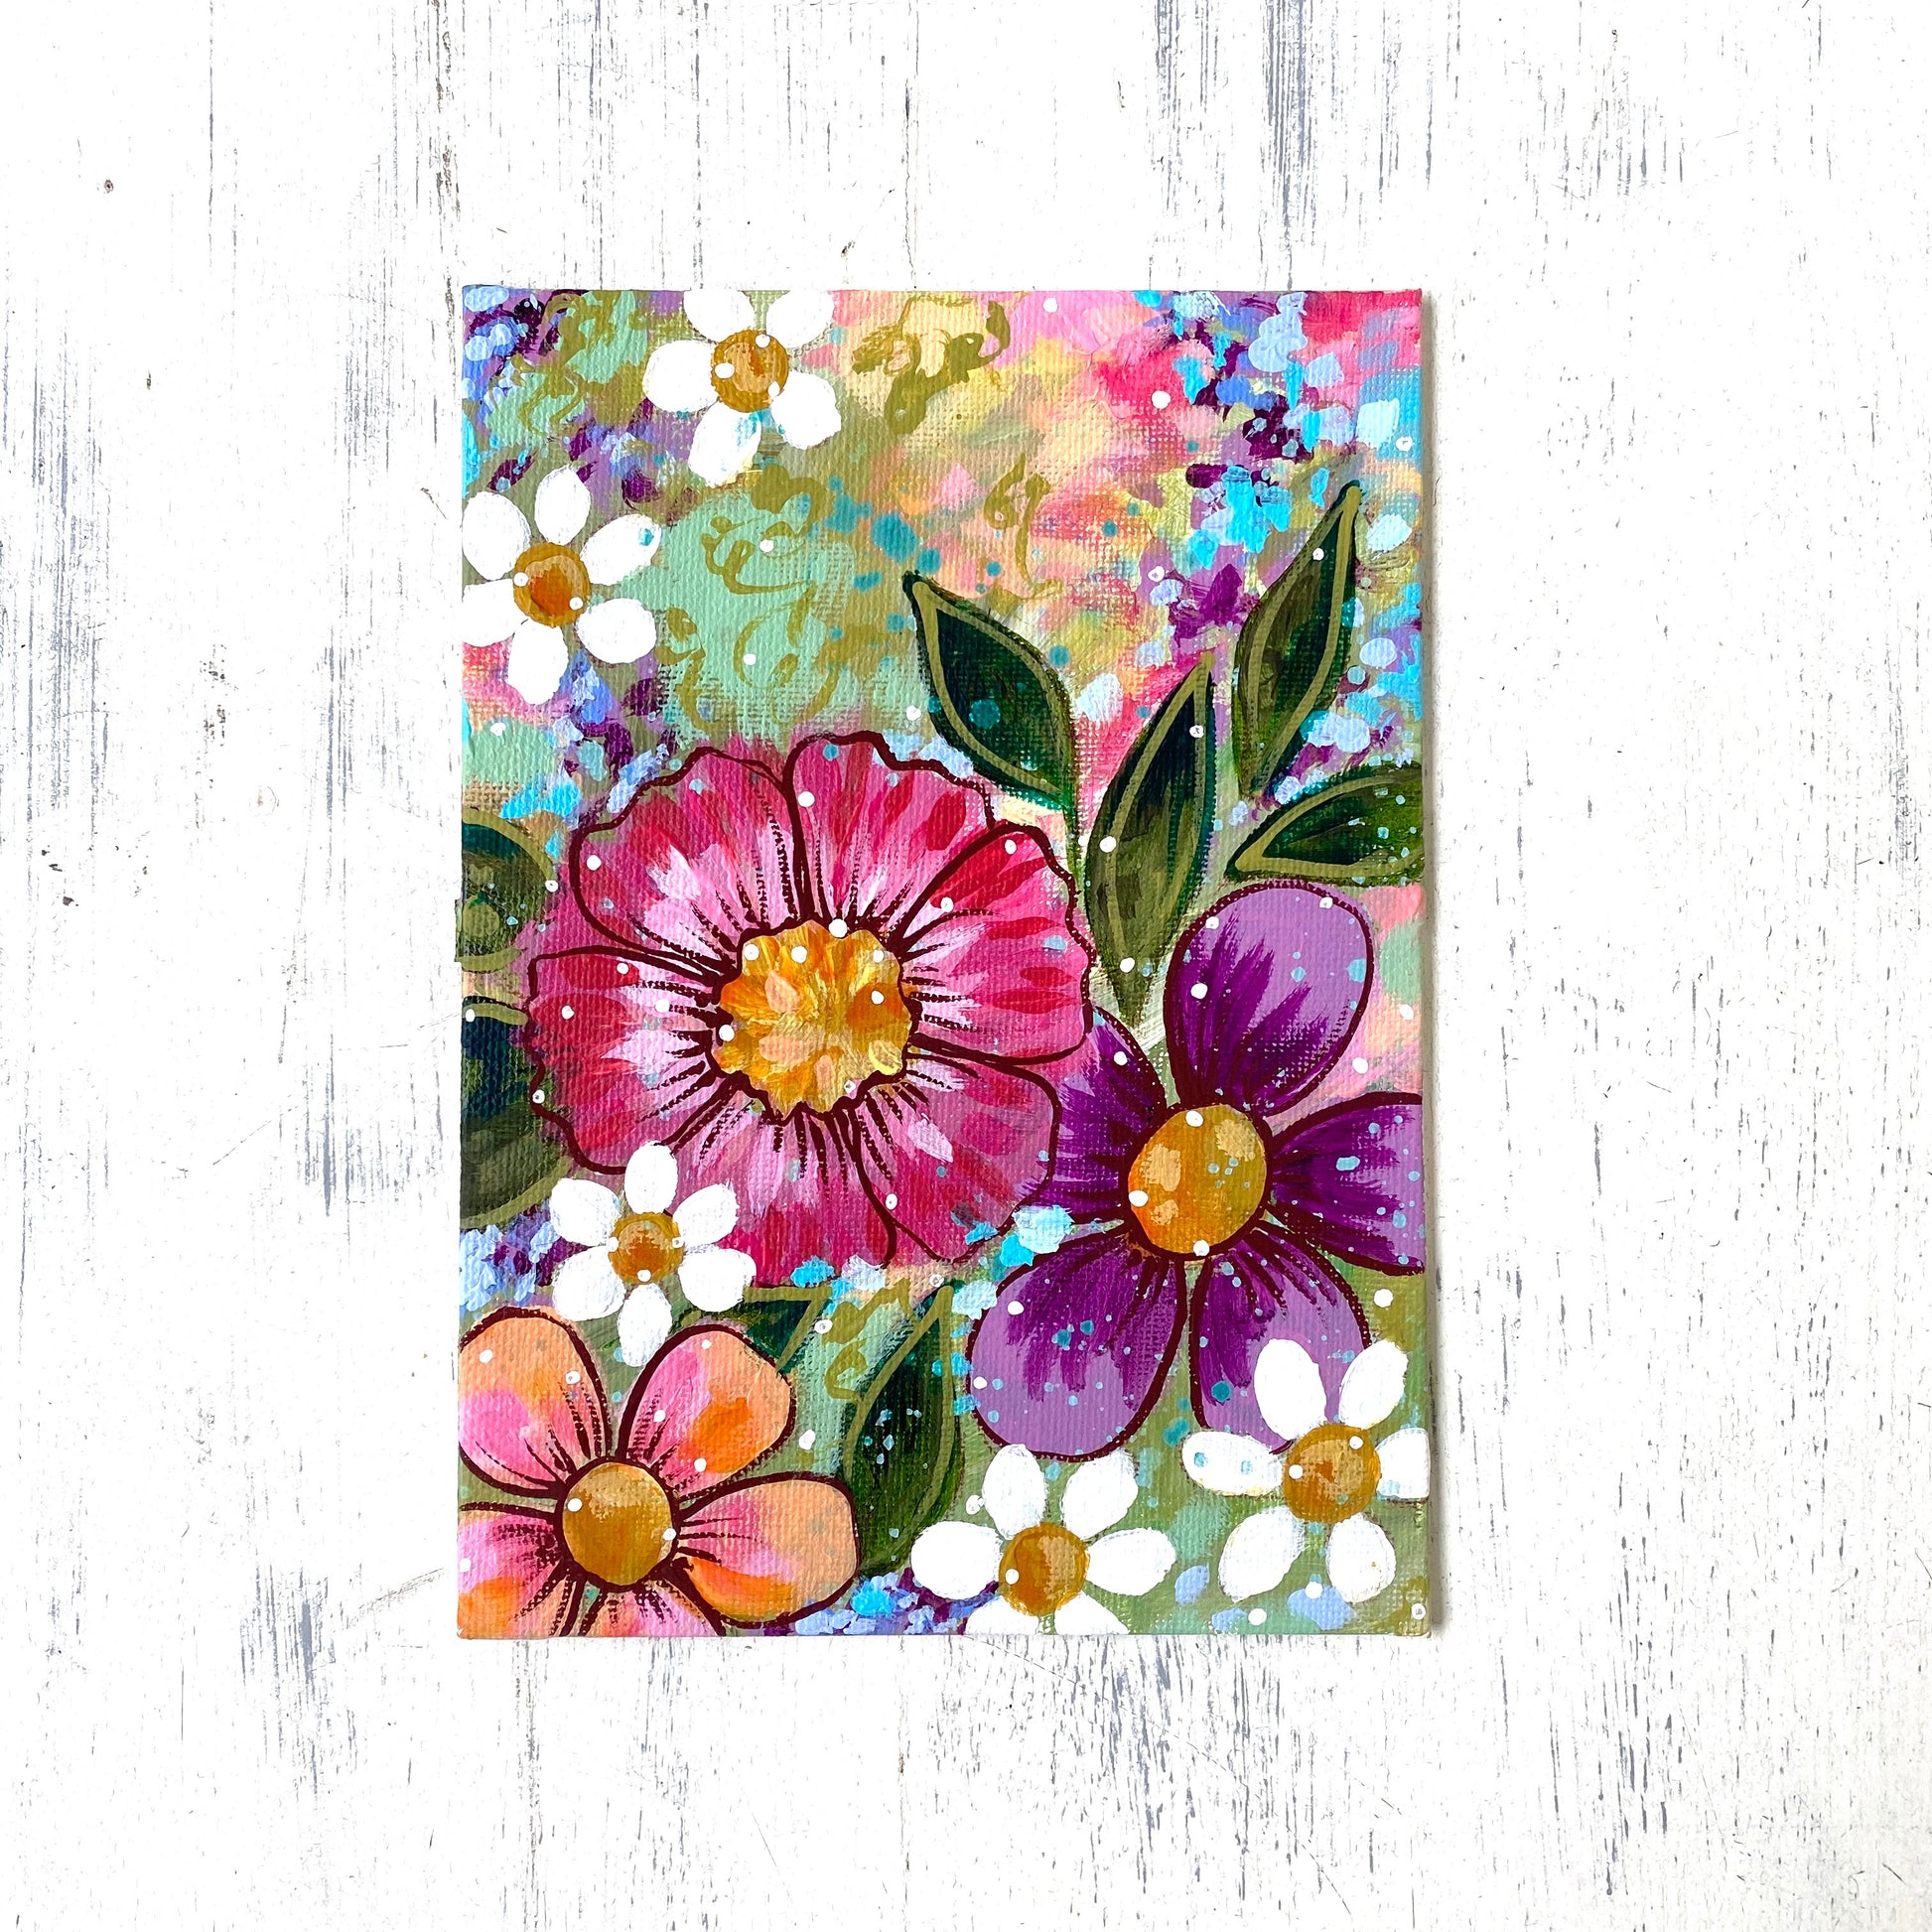 January Daily Painting Day 4 “Grow a Happy Life” 5x7 inch Floral Original - Bethany Joy Art